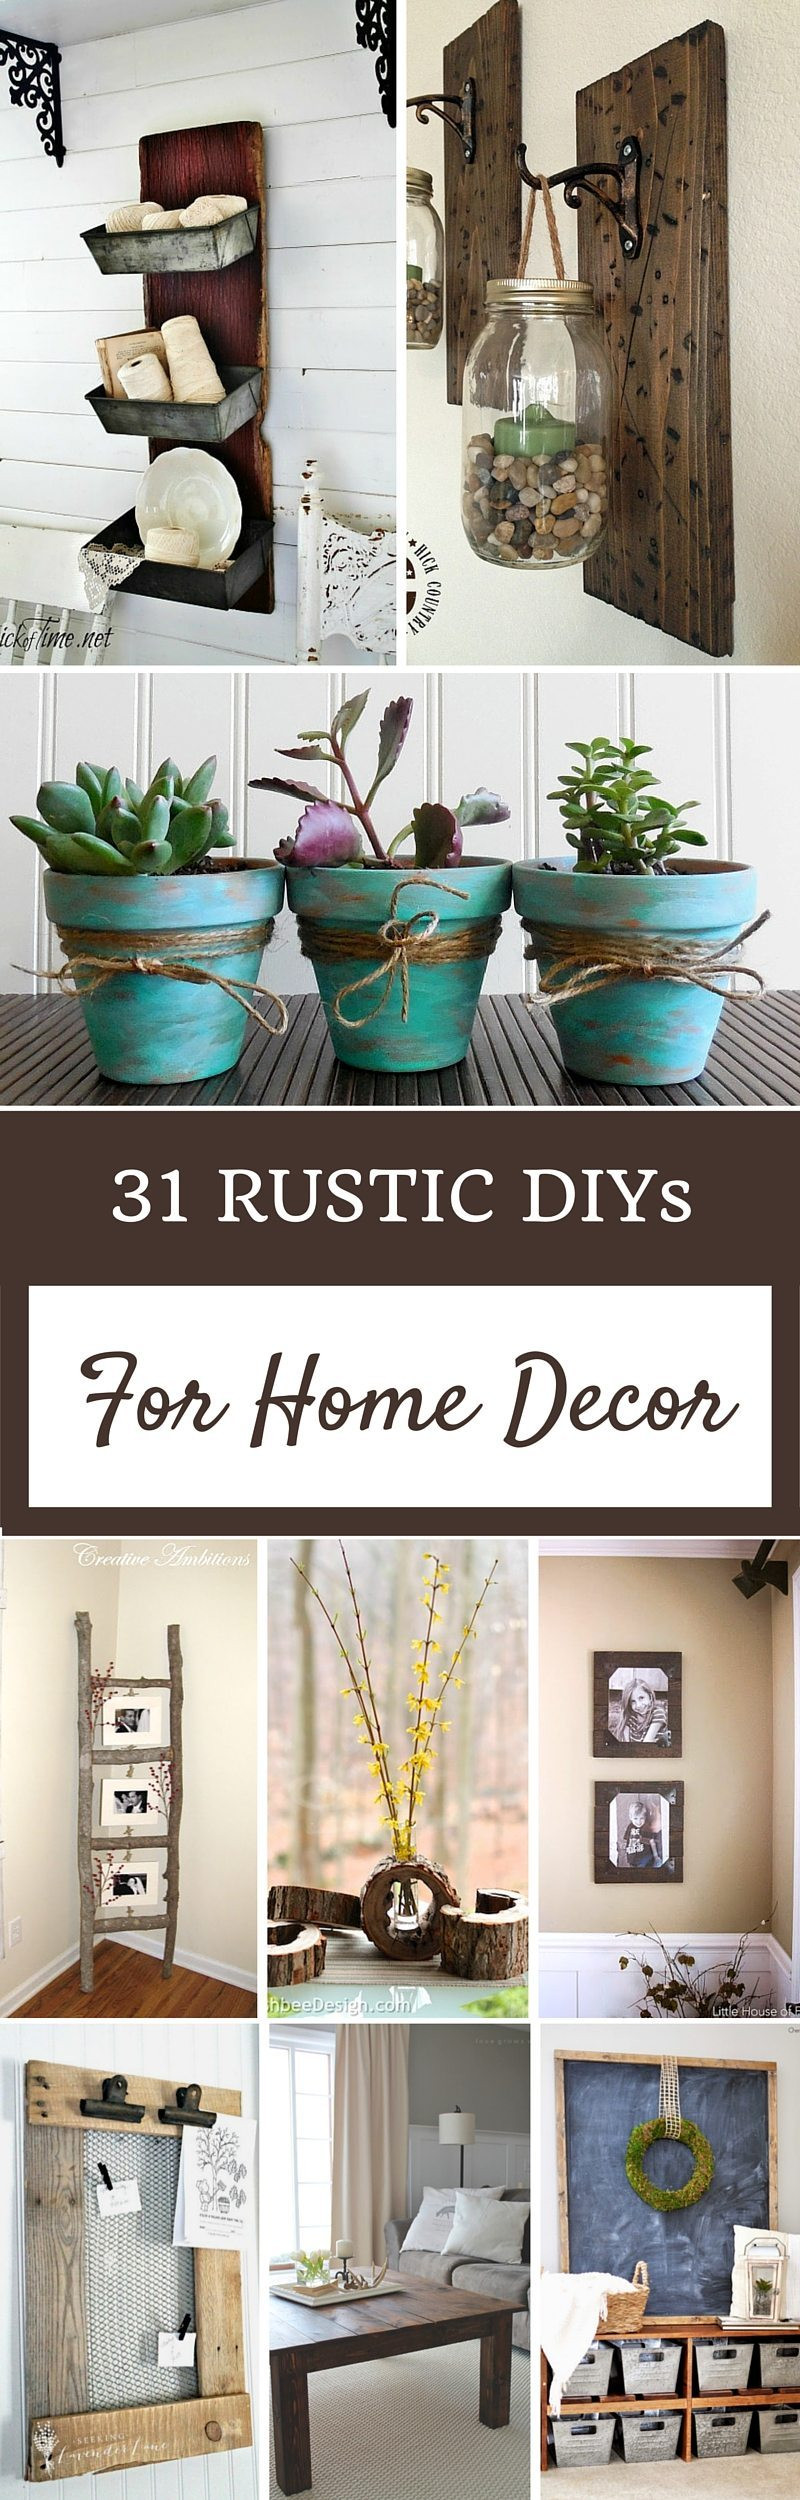 DIY Decorating Projects
 Rustic Home Decor Ideas